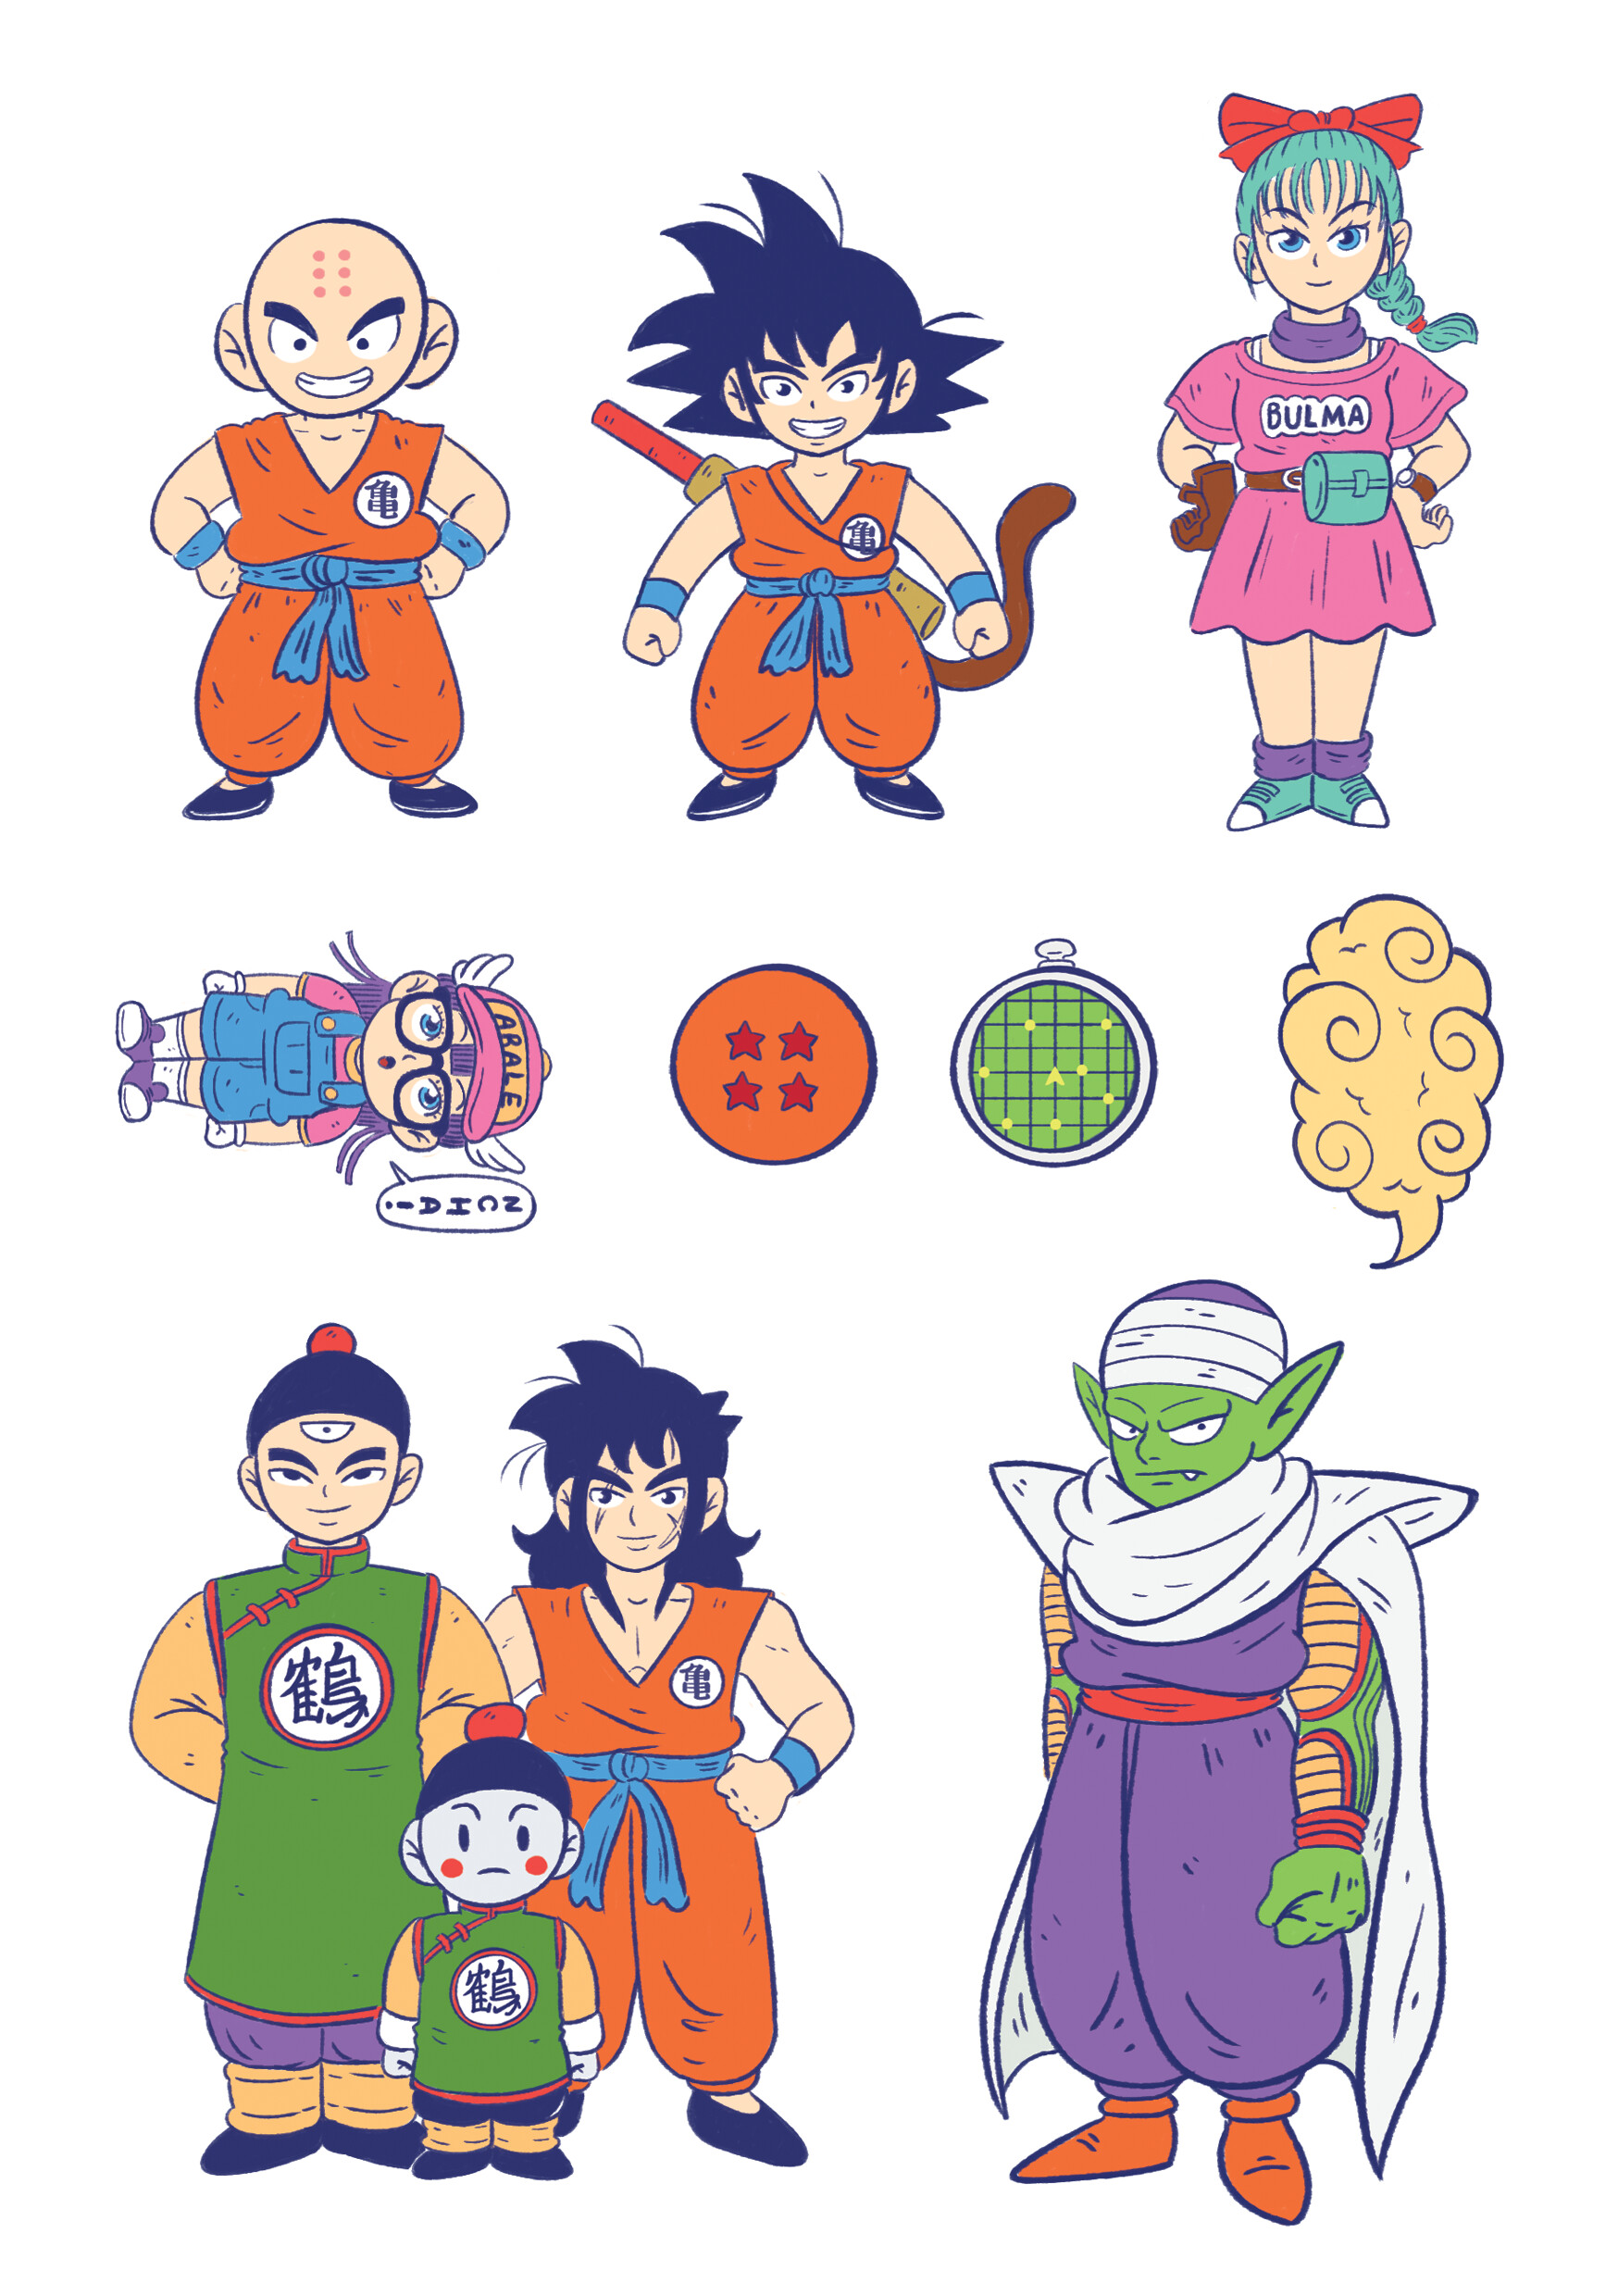 ArtStation - Commission for dragonball series character stickers